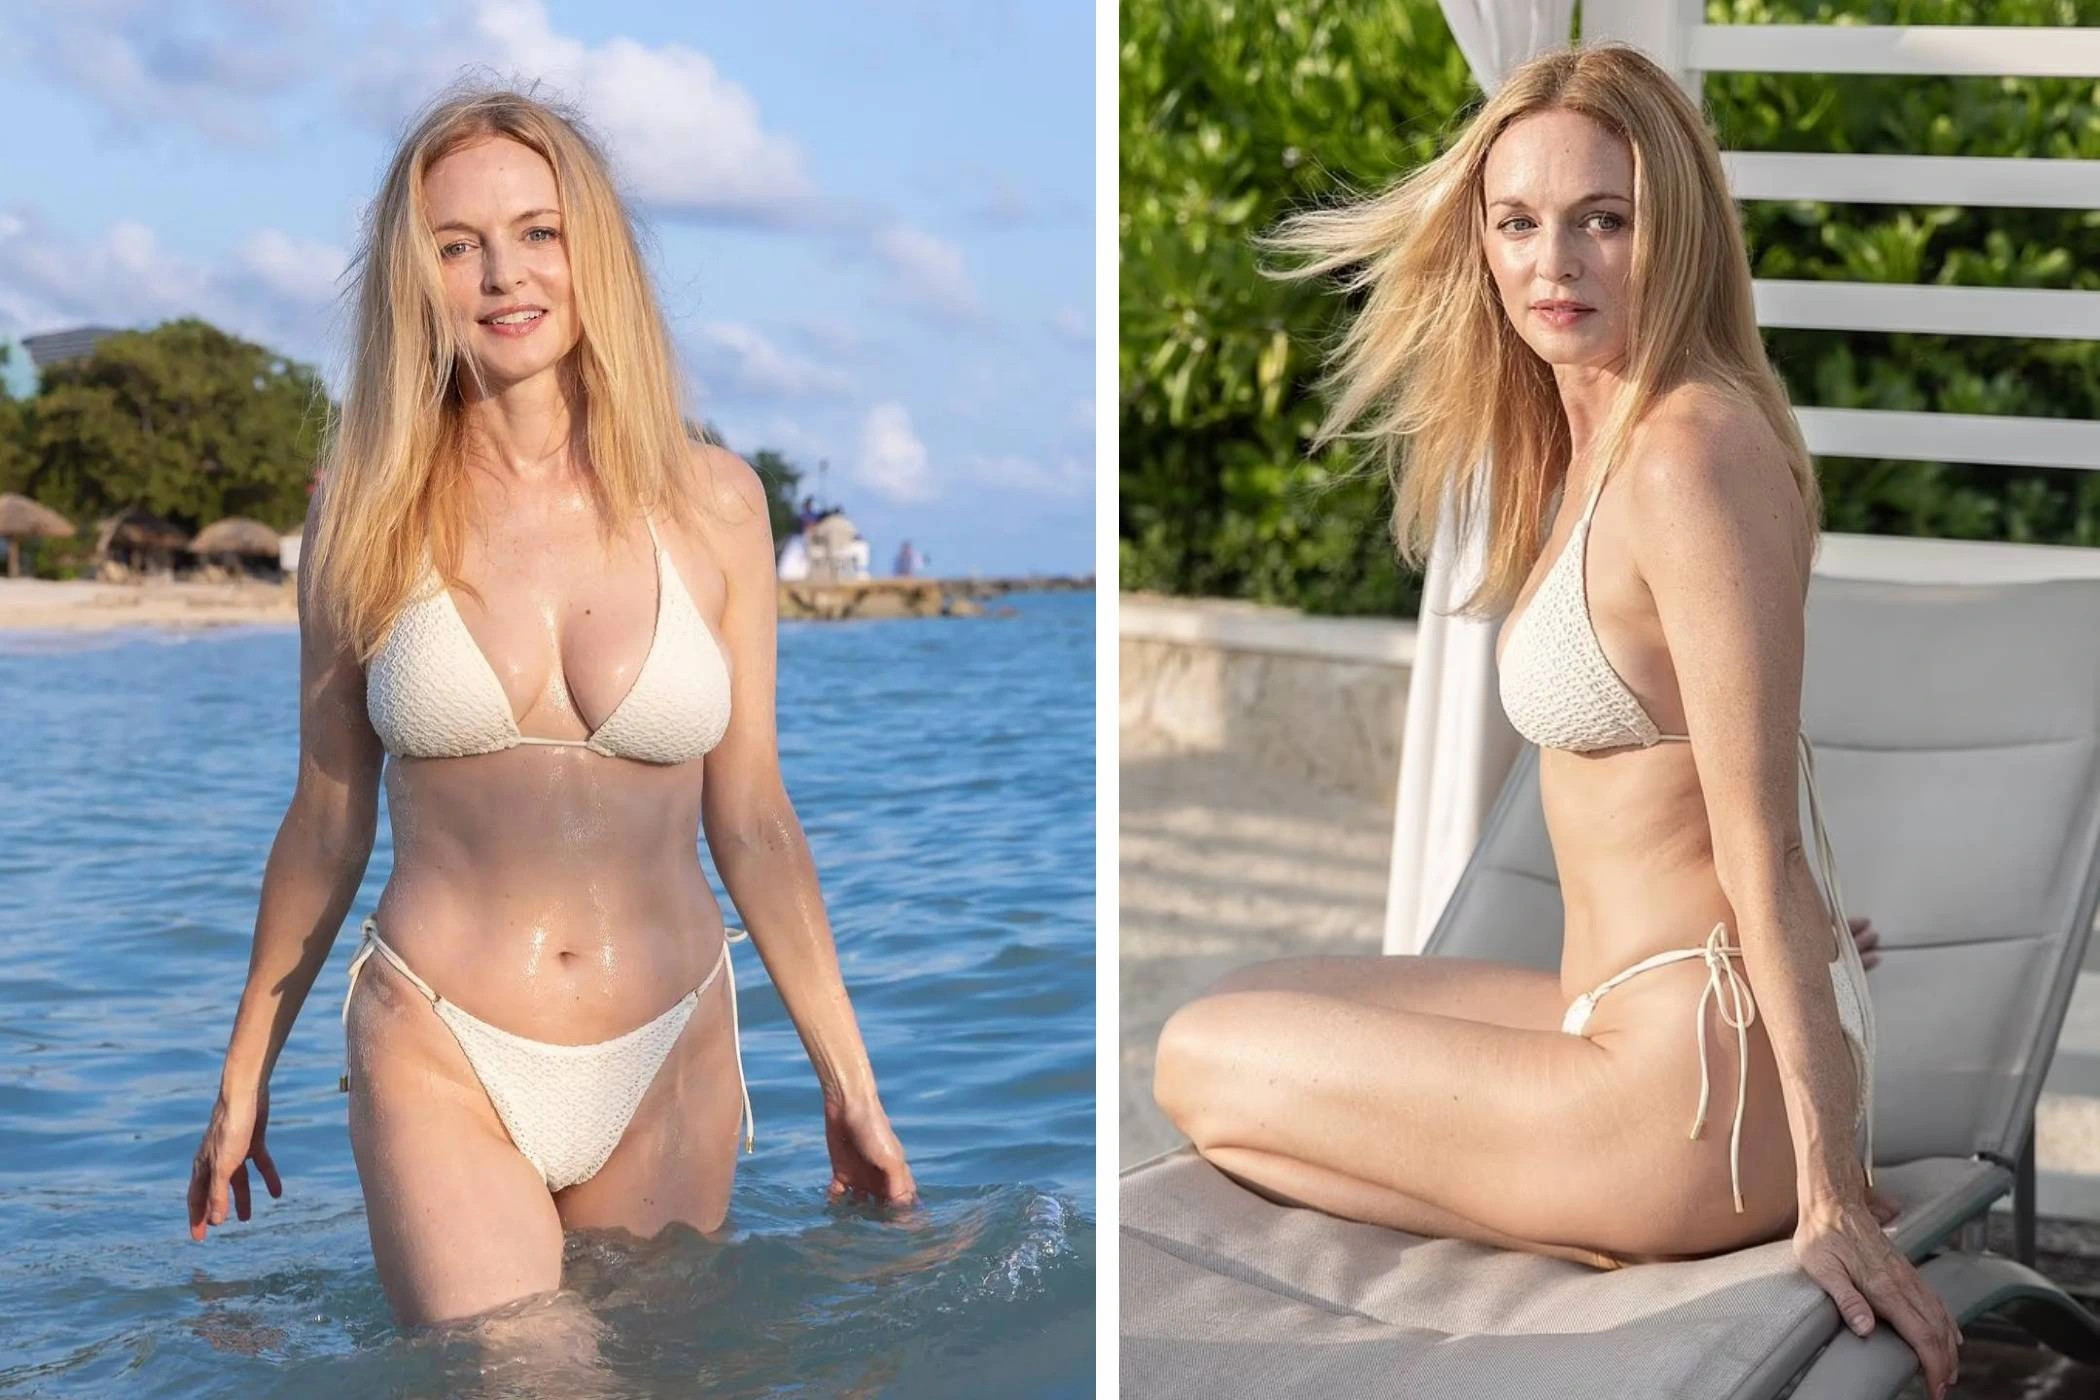 Heather Graham wearing a white bathing suit